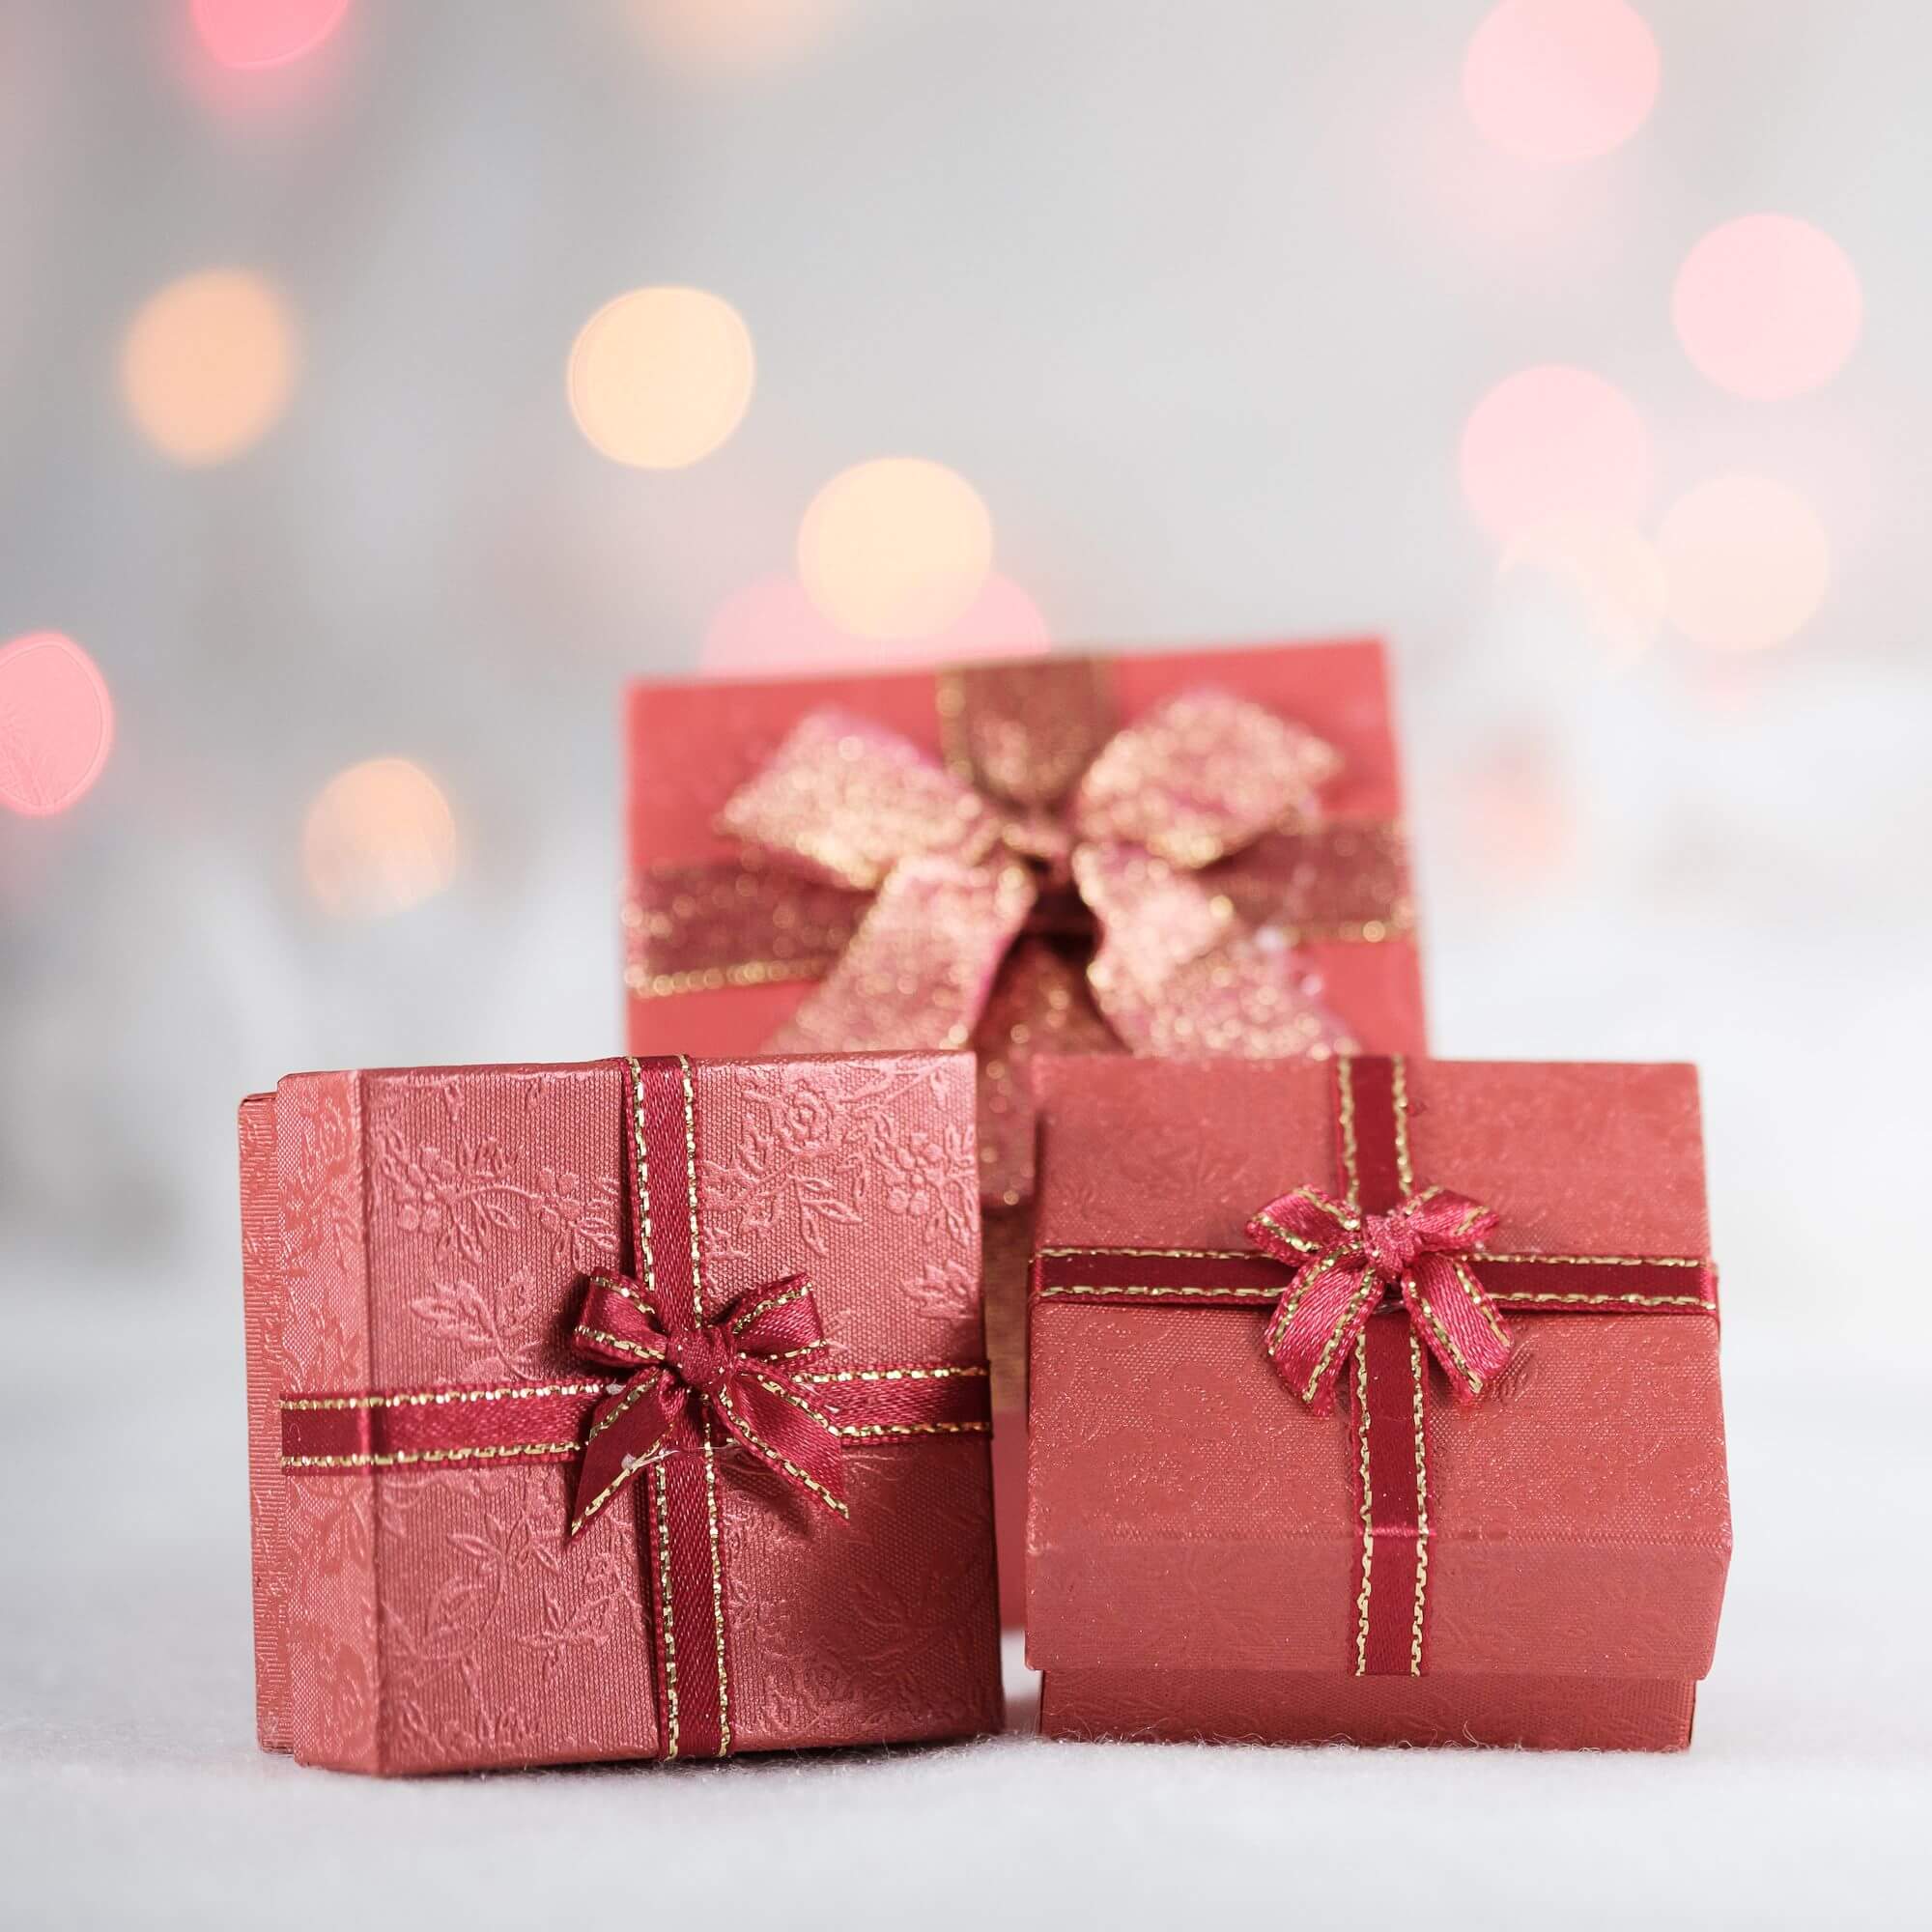 Three Christmas presents wrapped in red boxes and red ribbon